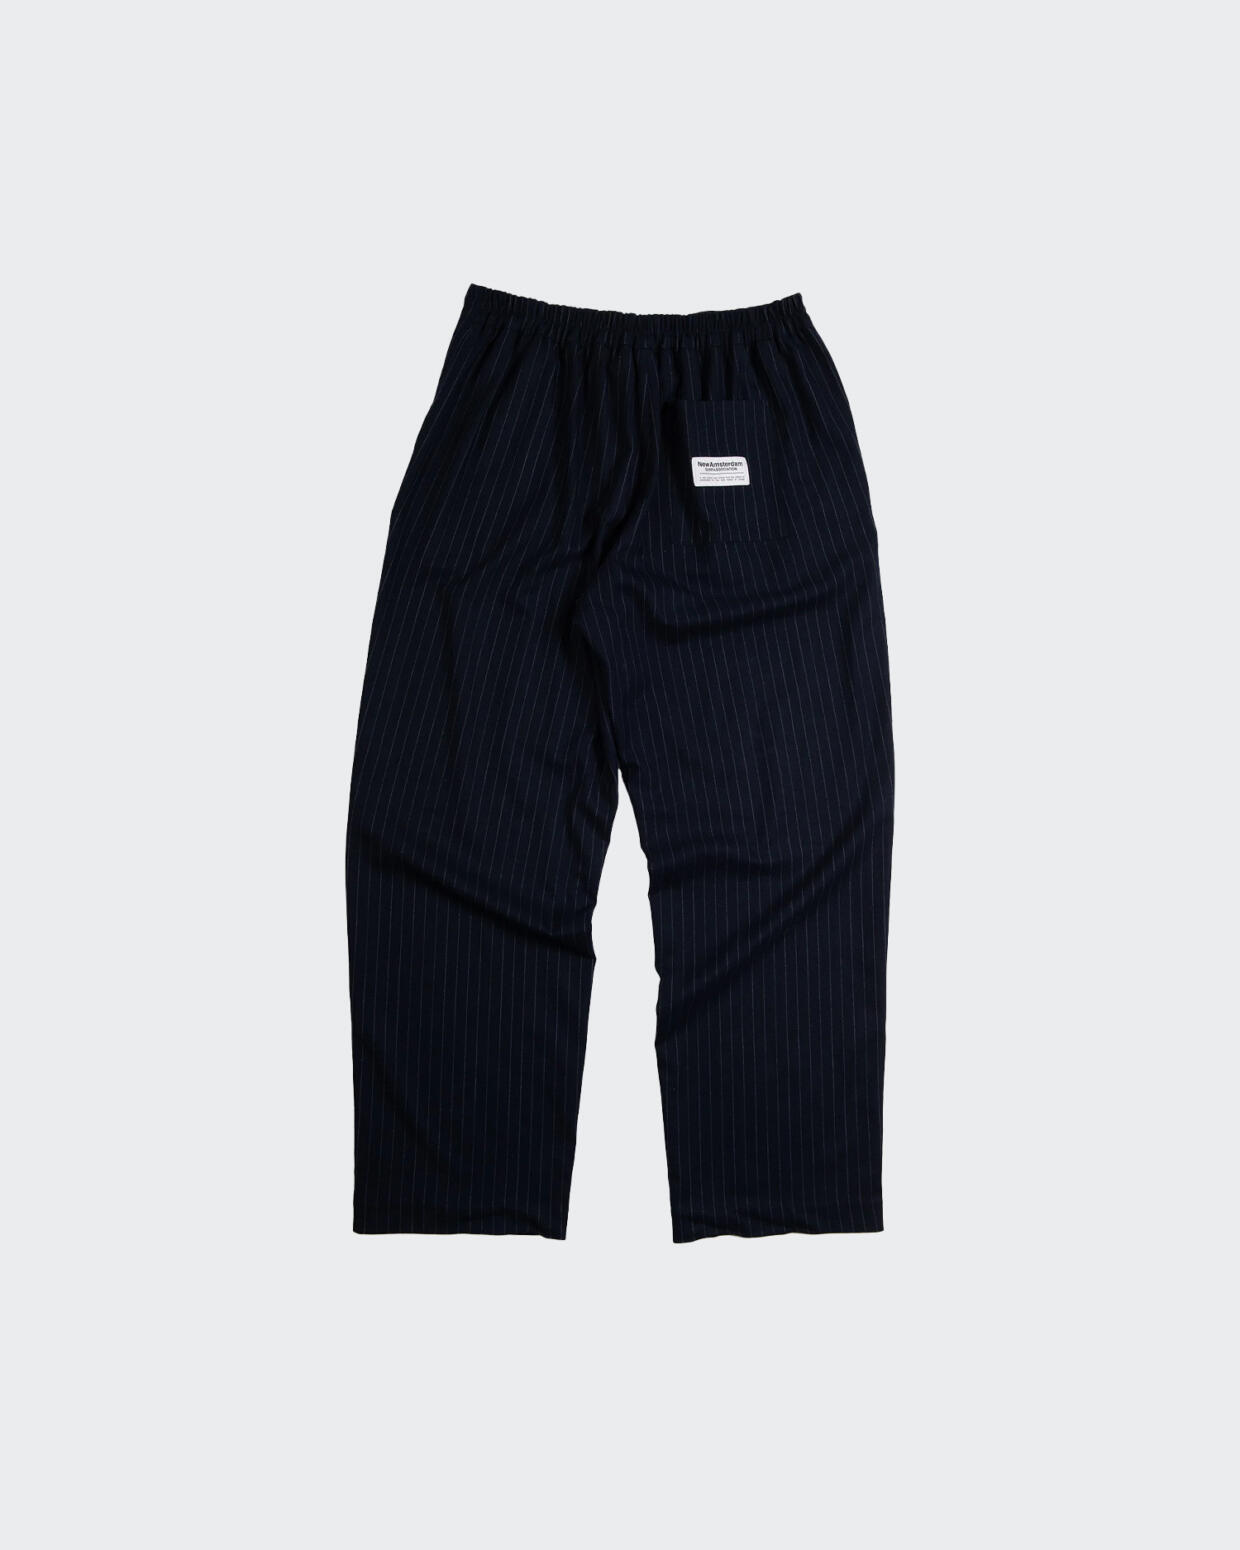 New Amsterdam Surf Association After Trousers Pinstripe